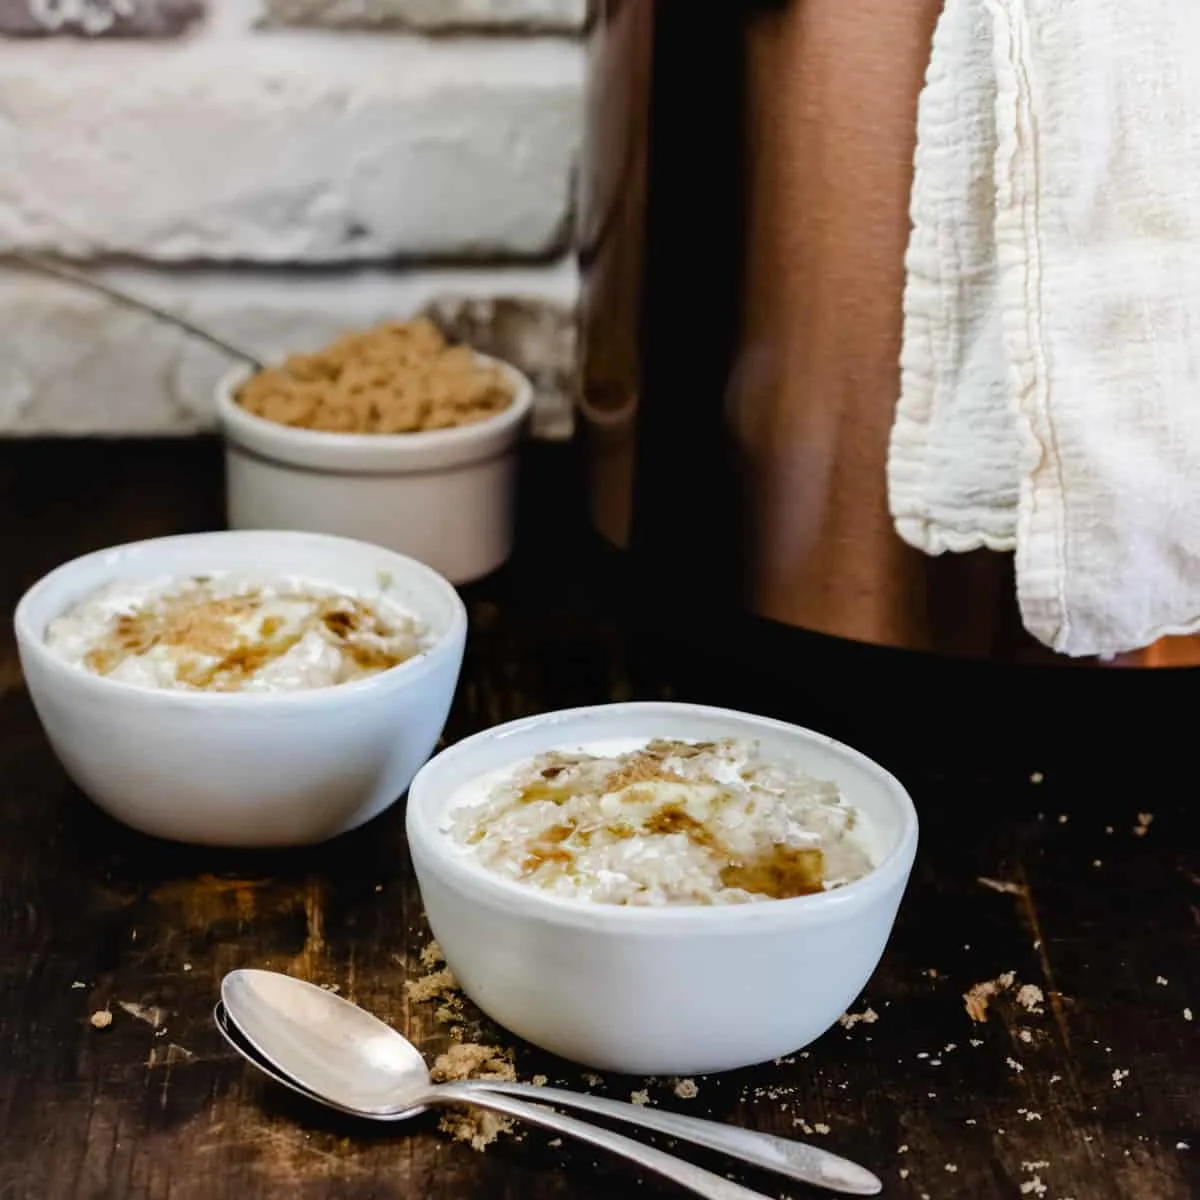 Bowls of oatmeal in front of a pressure cooker. 